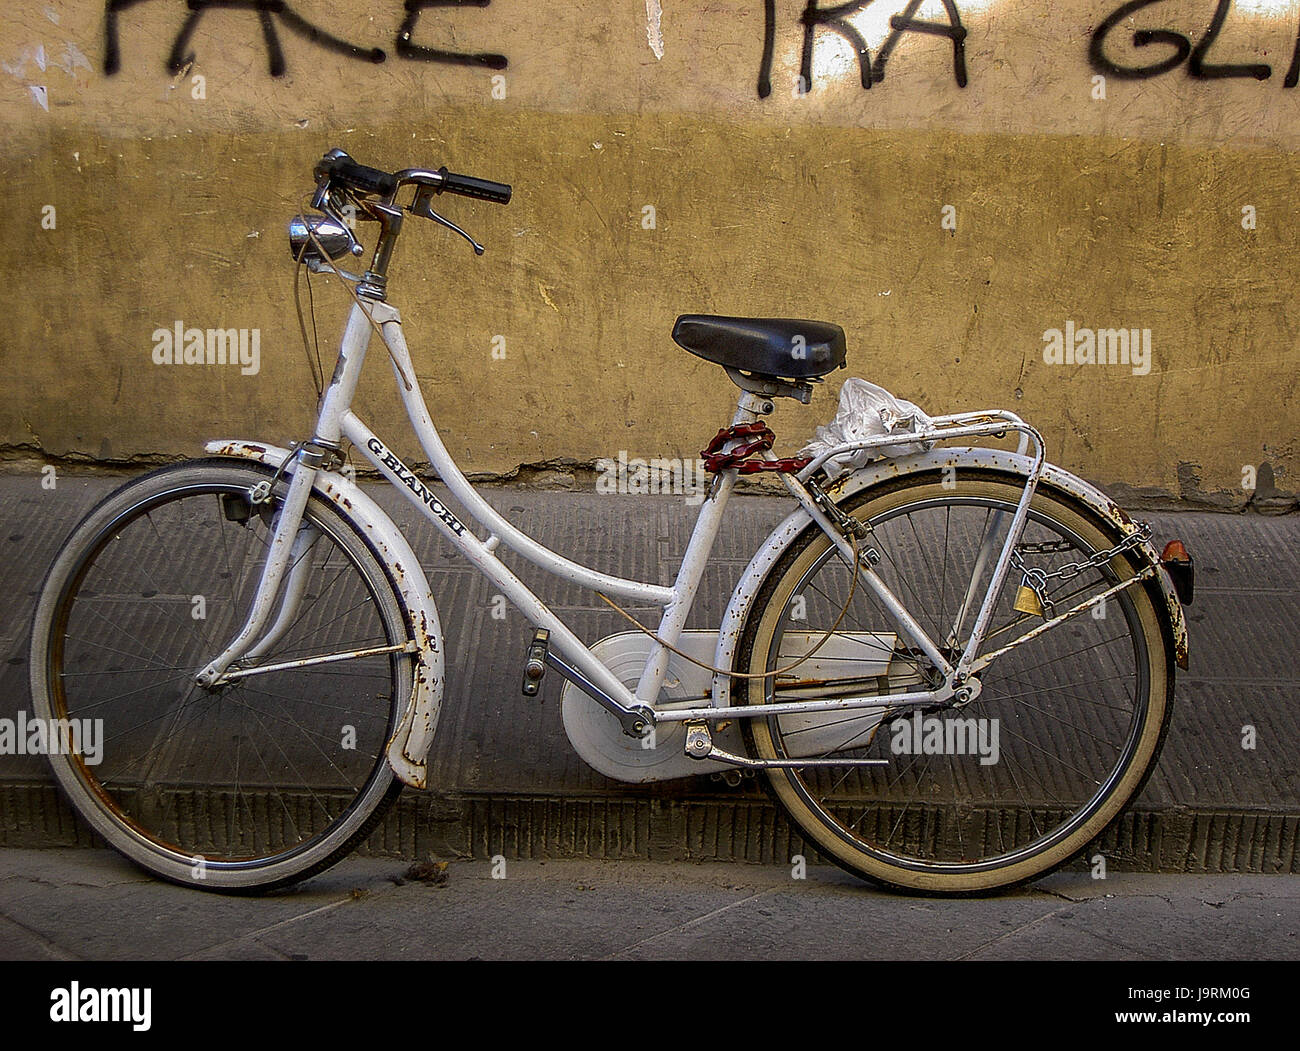 Malversar Valiente carga Old Bianchi bicycle on the side of the road in Rome Stock Photo - Alamy